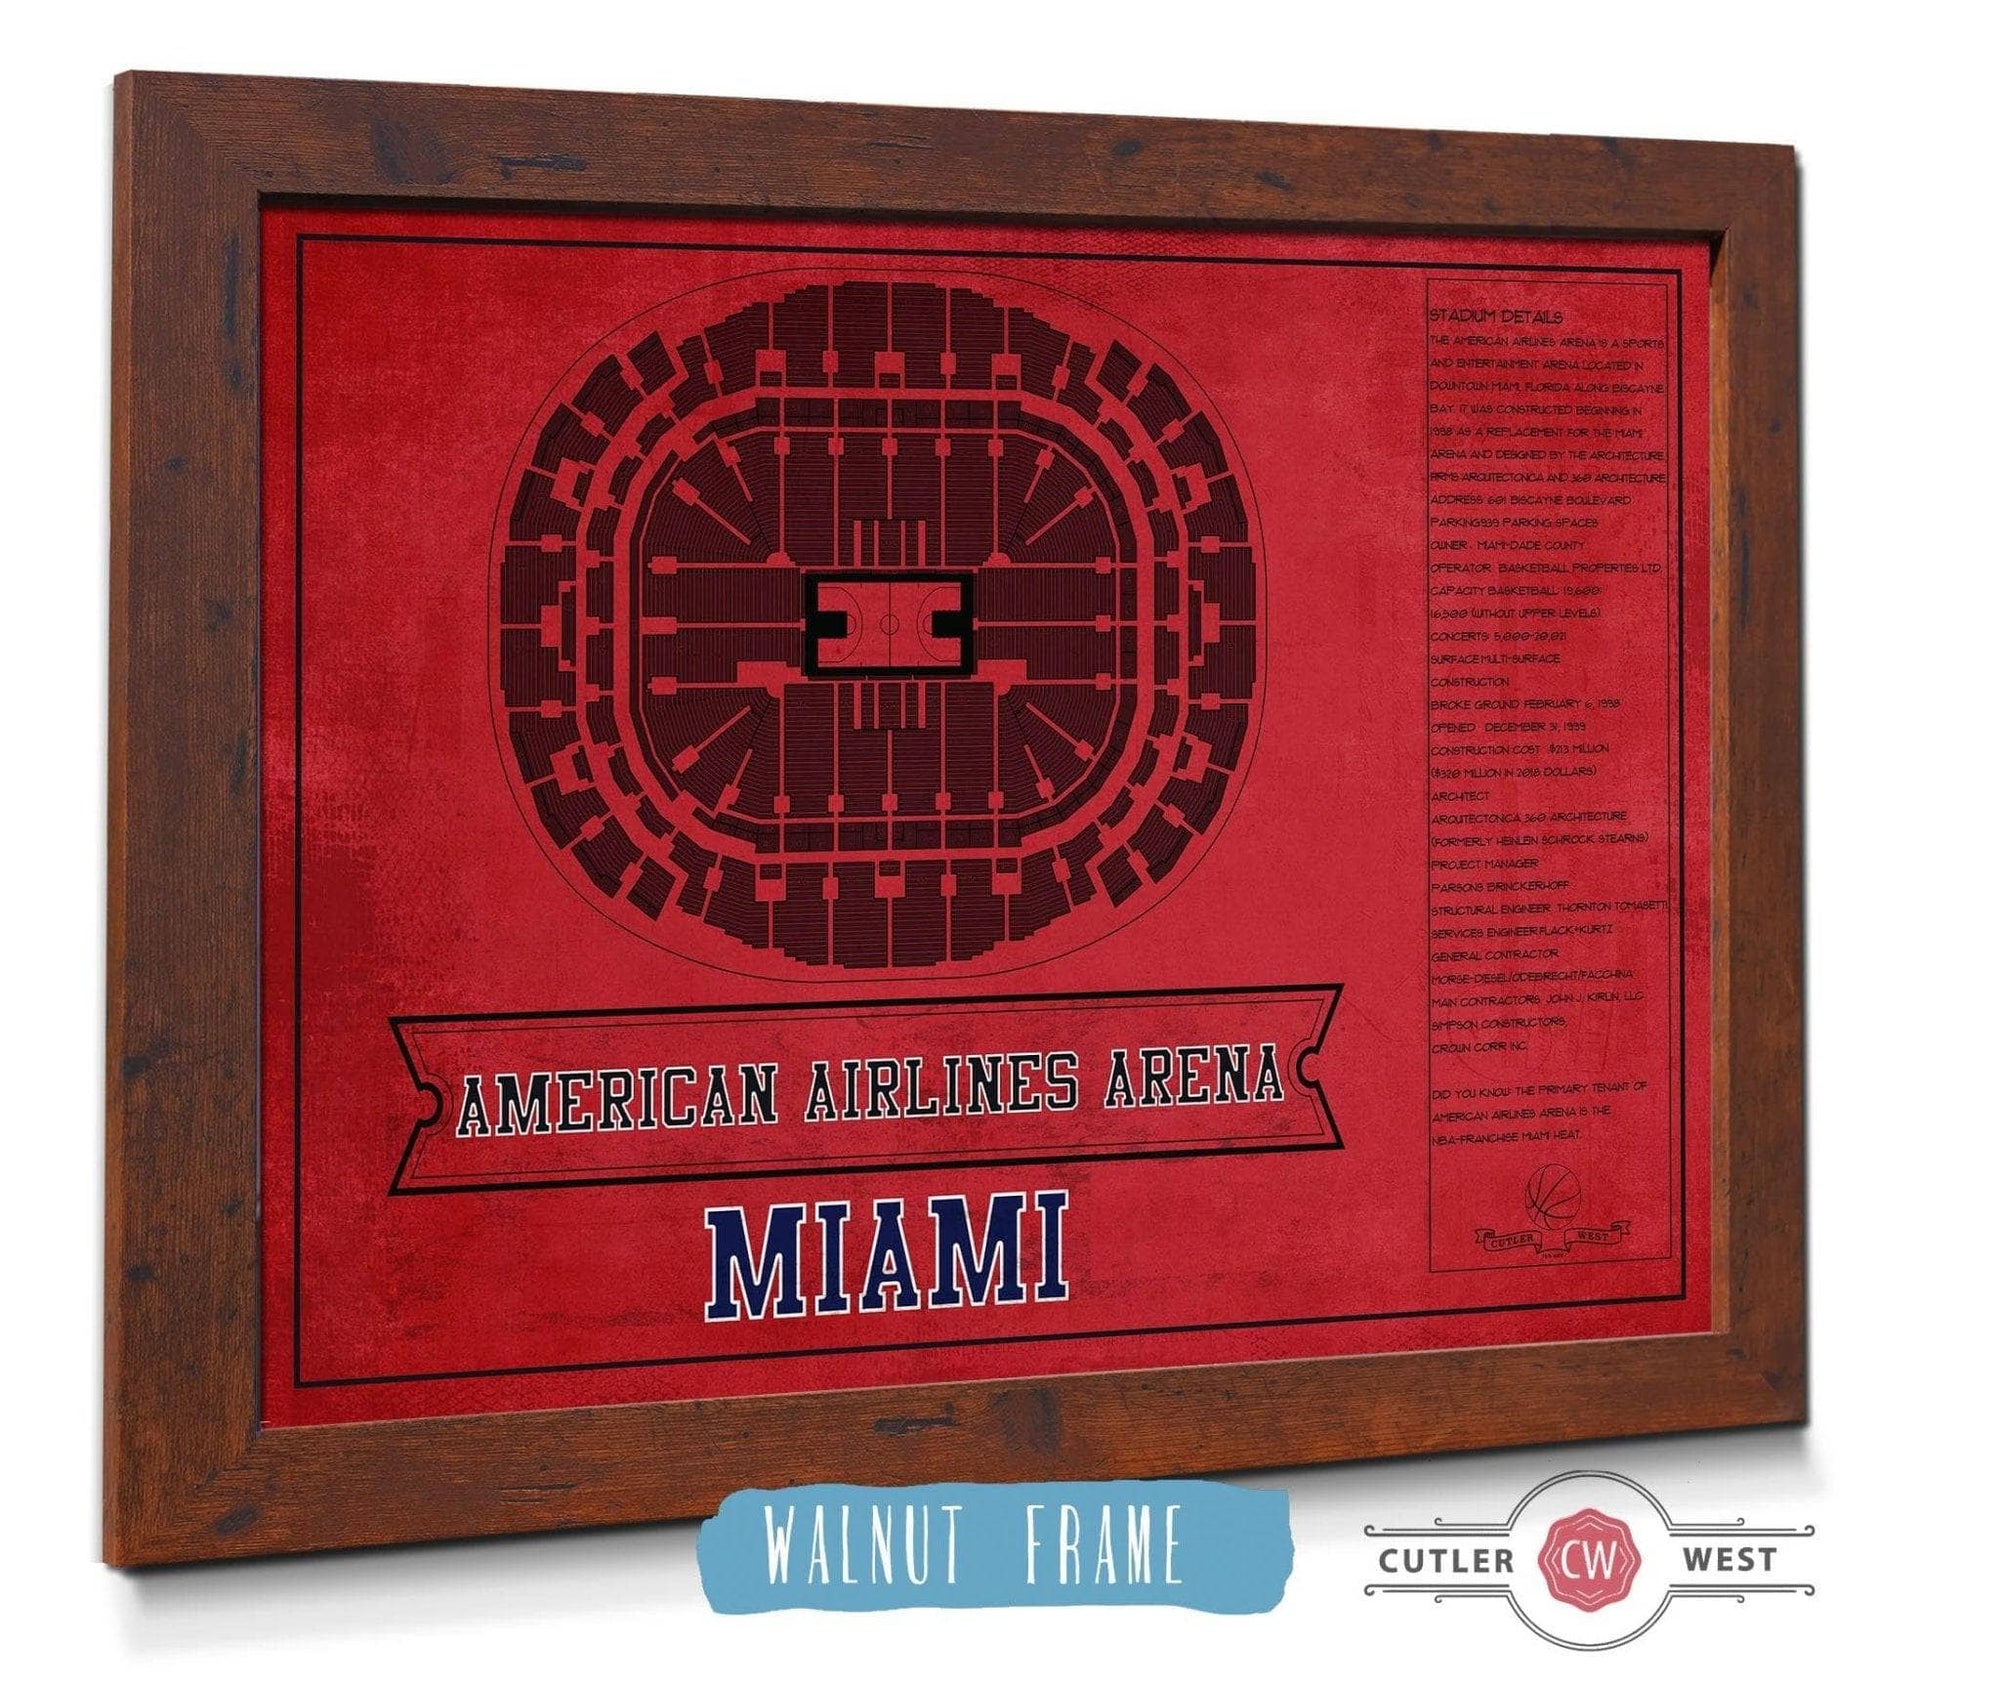 Cutler West Basketball Collection 14" x 11" / Walnut Frame Miami Heat - American Airlines Arena Vintage Basketball Blueprint NBA Team Color Print 675082021-TEAM_76764